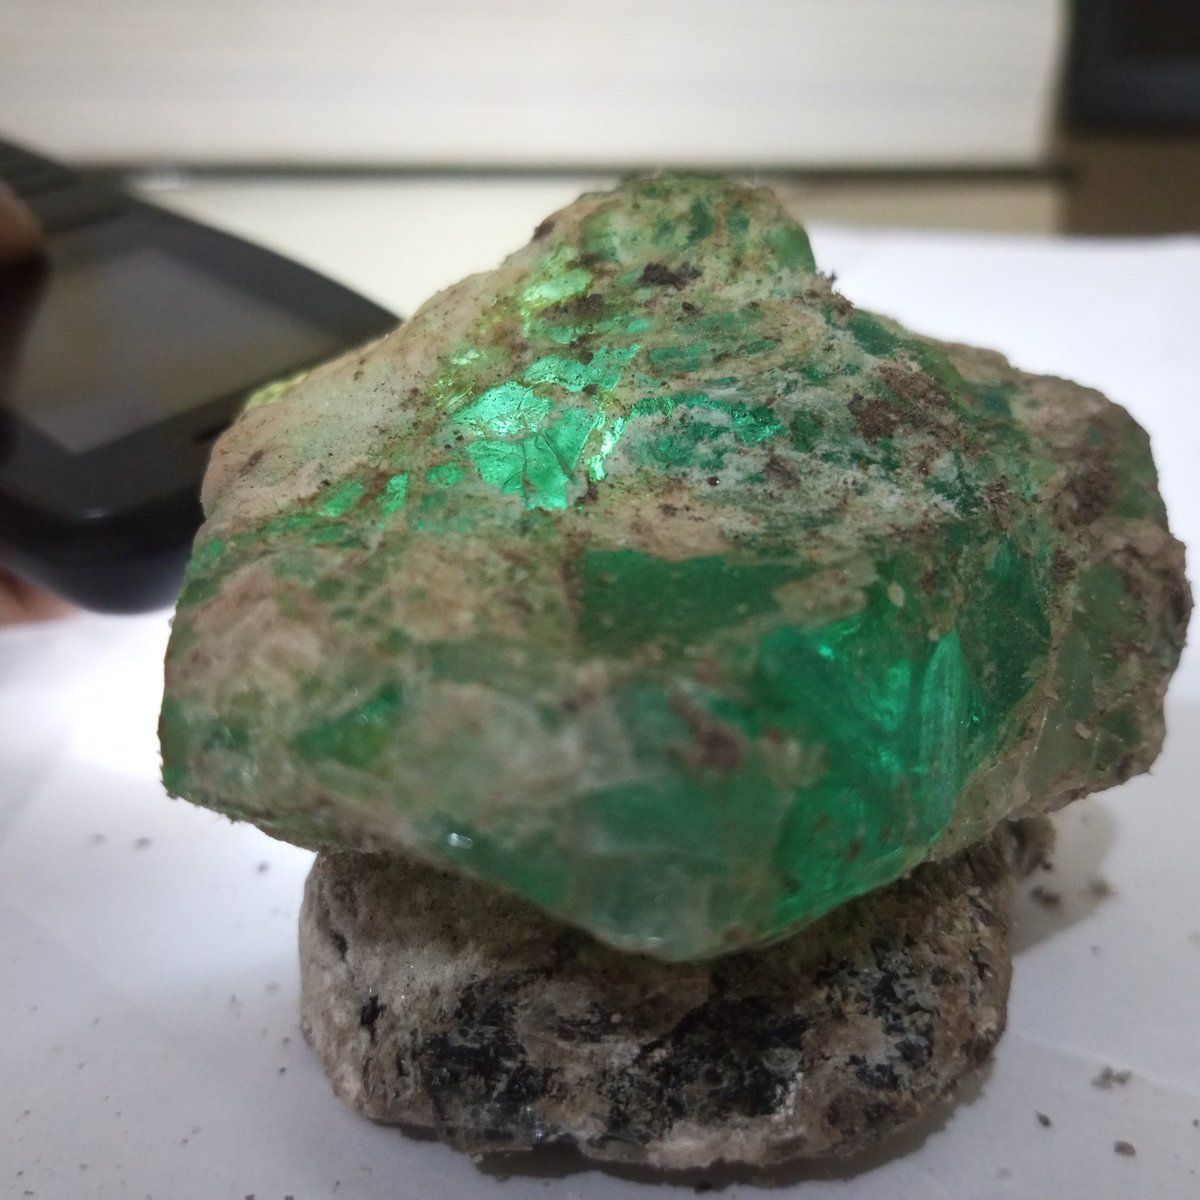 My brother surprised me with an extraordinary gift from Karamoja, Uganda. 
This unique find could be fluorite, a mineral with versatile uses. 

Feeling good 👍 😊

#miningexploration #mining #drilling #diamonddrilling #miningindustry #exploration #drillingequipment